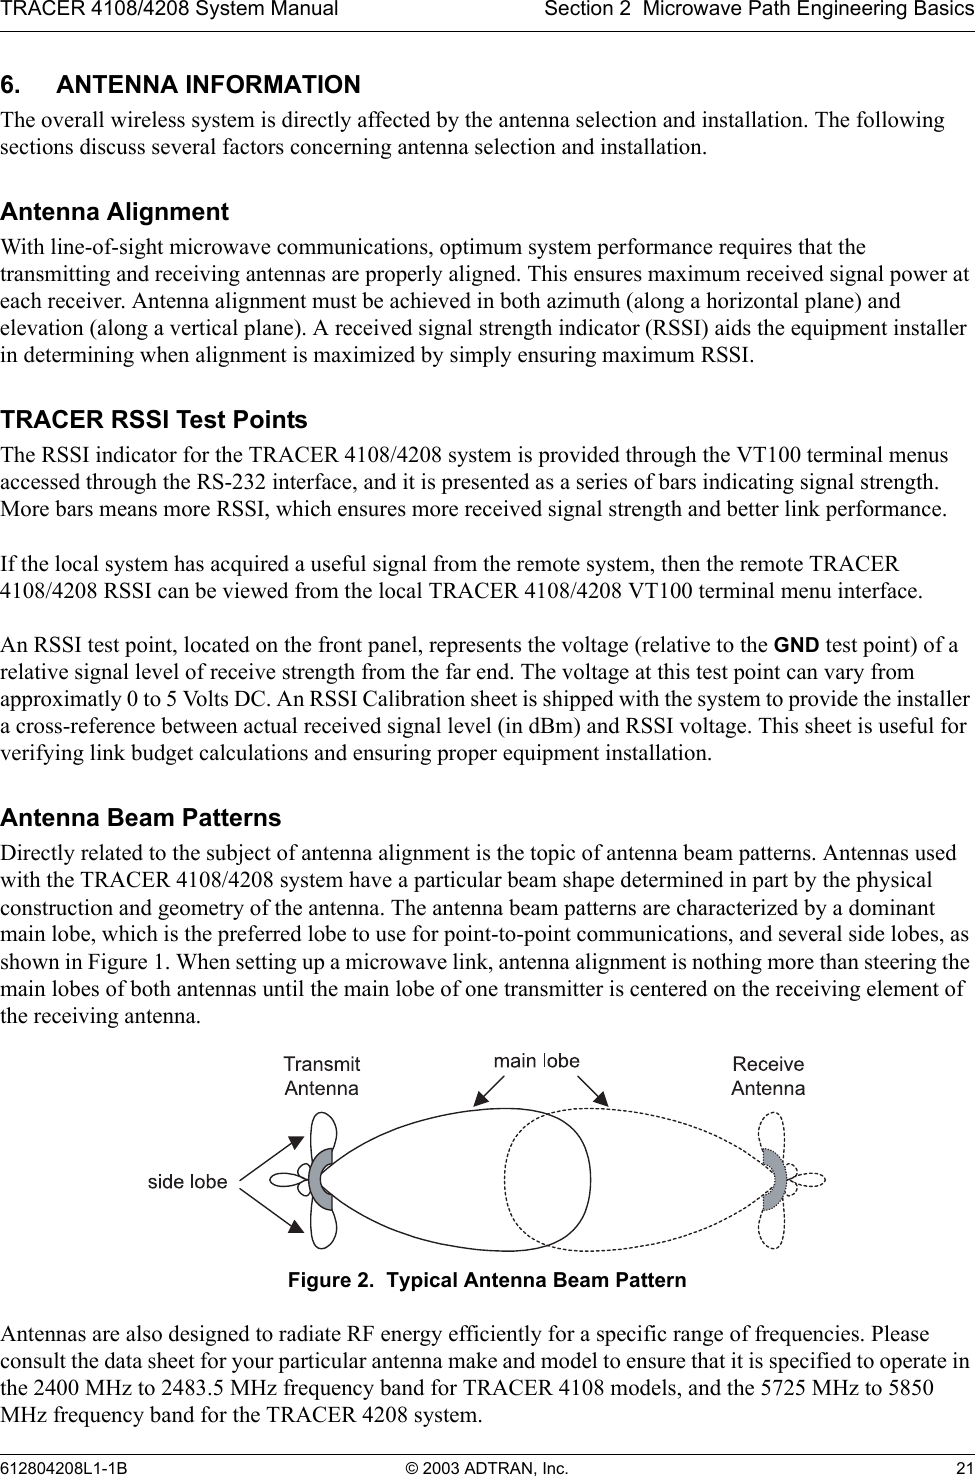 TRACER 4108/4208 System Manual Section 2  Microwave Path Engineering Basics612804208L1-1B © 2003 ADTRAN, Inc. 216. ANTENNA INFORMATIONThe overall wireless system is directly affected by the antenna selection and installation. The following sections discuss several factors concerning antenna selection and installation.Antenna AlignmentWith line-of-sight microwave communications, optimum system performance requires that the transmitting and receiving antennas are properly aligned. This ensures maximum received signal power at each receiver. Antenna alignment must be achieved in both azimuth (along a horizontal plane) and elevation (along a vertical plane). A received signal strength indicator (RSSI) aids the equipment installer in determining when alignment is maximized by simply ensuring maximum RSSI. TRACER RSSI Test PointsThe RSSI indicator for the TRACER 4108/4208 system is provided through the VT100 terminal menus accessed through the RS-232 interface, and it is presented as a series of bars indicating signal strength. More bars means more RSSI, which ensures more received signal strength and better link performance.If the local system has acquired a useful signal from the remote system, then the remote TRACER 4108/4208 RSSI can be viewed from the local TRACER 4108/4208 VT100 terminal menu interface.An RSSI test point, located on the front panel, represents the voltage (relative to the GND test point) of a relative signal level of receive strength from the far end. The voltage at this test point can vary from approximatly 0 to 5 Volts DC. An RSSI Calibration sheet is shipped with the system to provide the installer a cross-reference between actual received signal level (in dBm) and RSSI voltage. This sheet is useful for verifying link budget calculations and ensuring proper equipment installation.Antenna Beam PatternsDirectly related to the subject of antenna alignment is the topic of antenna beam patterns. Antennas used with the TRACER 4108/4208 system have a particular beam shape determined in part by the physical construction and geometry of the antenna. The antenna beam patterns are characterized by a dominant main lobe, which is the preferred lobe to use for point-to-point communications, and several side lobes, as shown in Figure 1. When setting up a microwave link, antenna alignment is nothing more than steering the main lobes of both antennas until the main lobe of one transmitter is centered on the receiving element of the receiving antenna.Figure 2.  Typical Antenna Beam PatternAntennas are also designed to radiate RF energy efficiently for a specific range of frequencies. Please consult the data sheet for your particular antenna make and model to ensure that it is specified to operate in the 2400 MHz to 2483.5 MHz frequency band for TRACER 4108 models, and the 5725 MHz to 5850 MHz frequency band for the TRACER 4208 system.